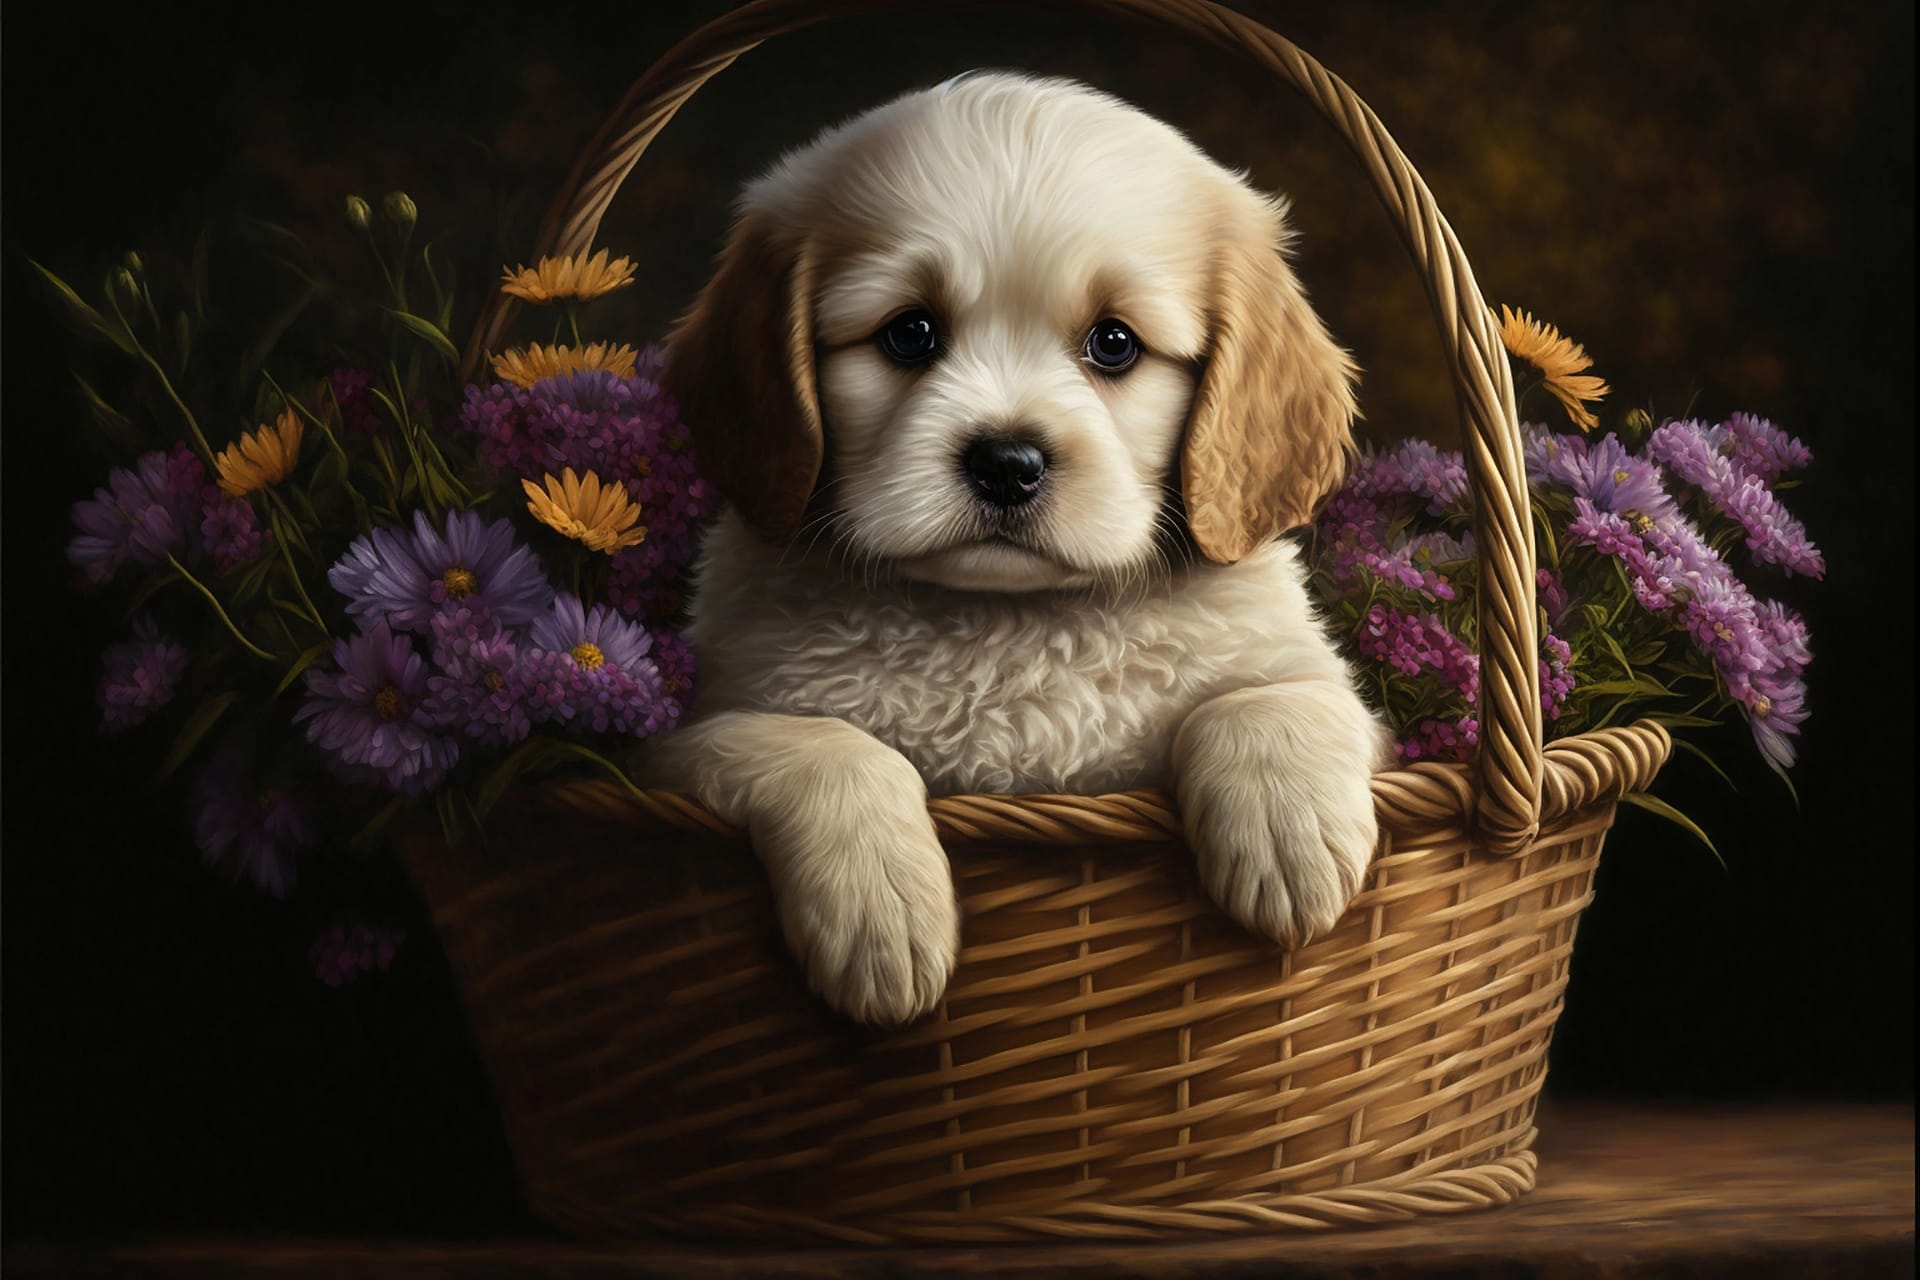 Cute puppy sitting basket flowers dog images